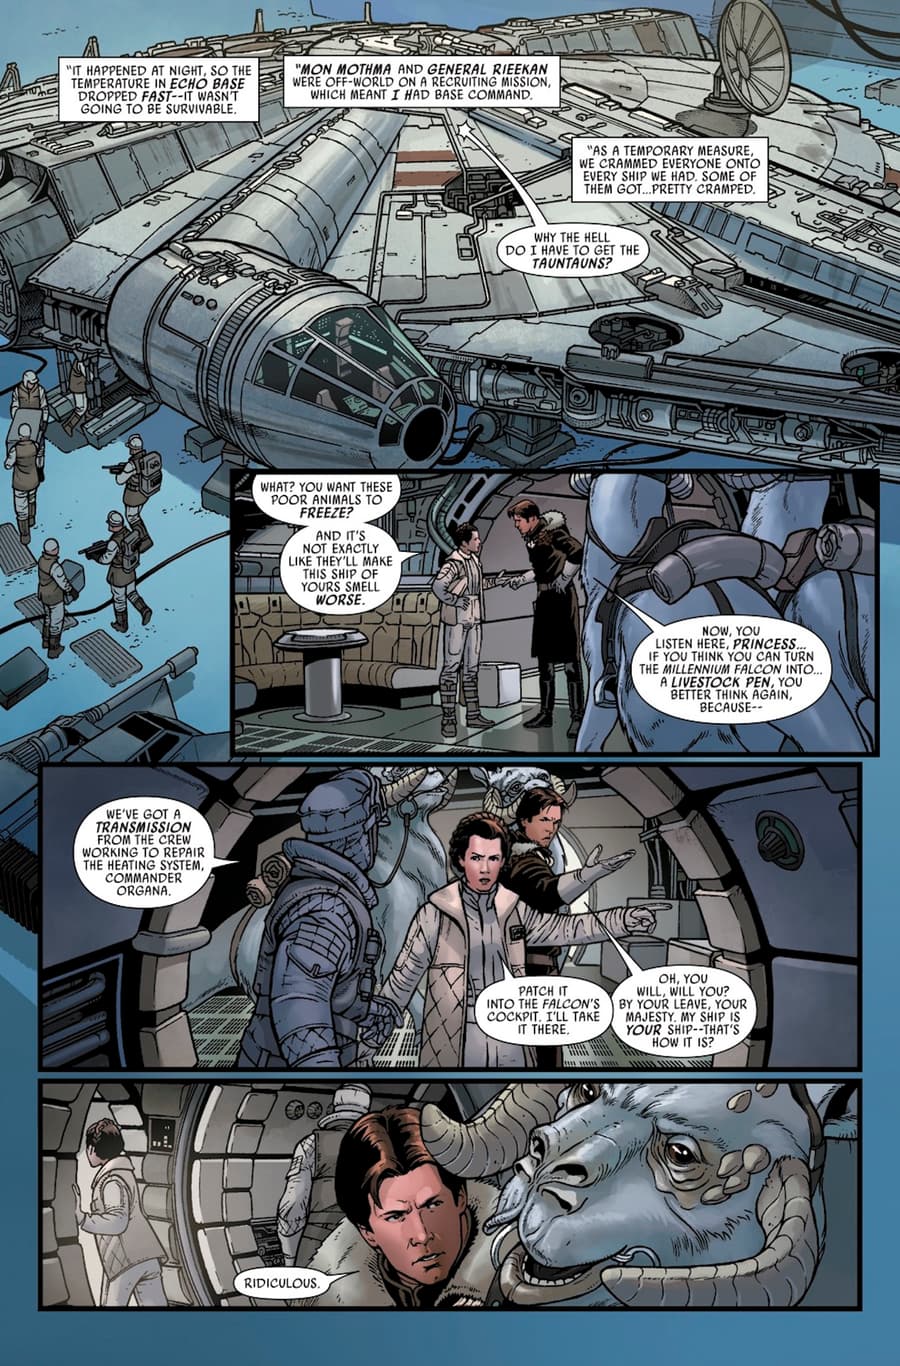 STAR WARS #12 interior art by Ramon Rosanas with colors by Rachelle Rosenberg and letters by VC's Clayton Cowles